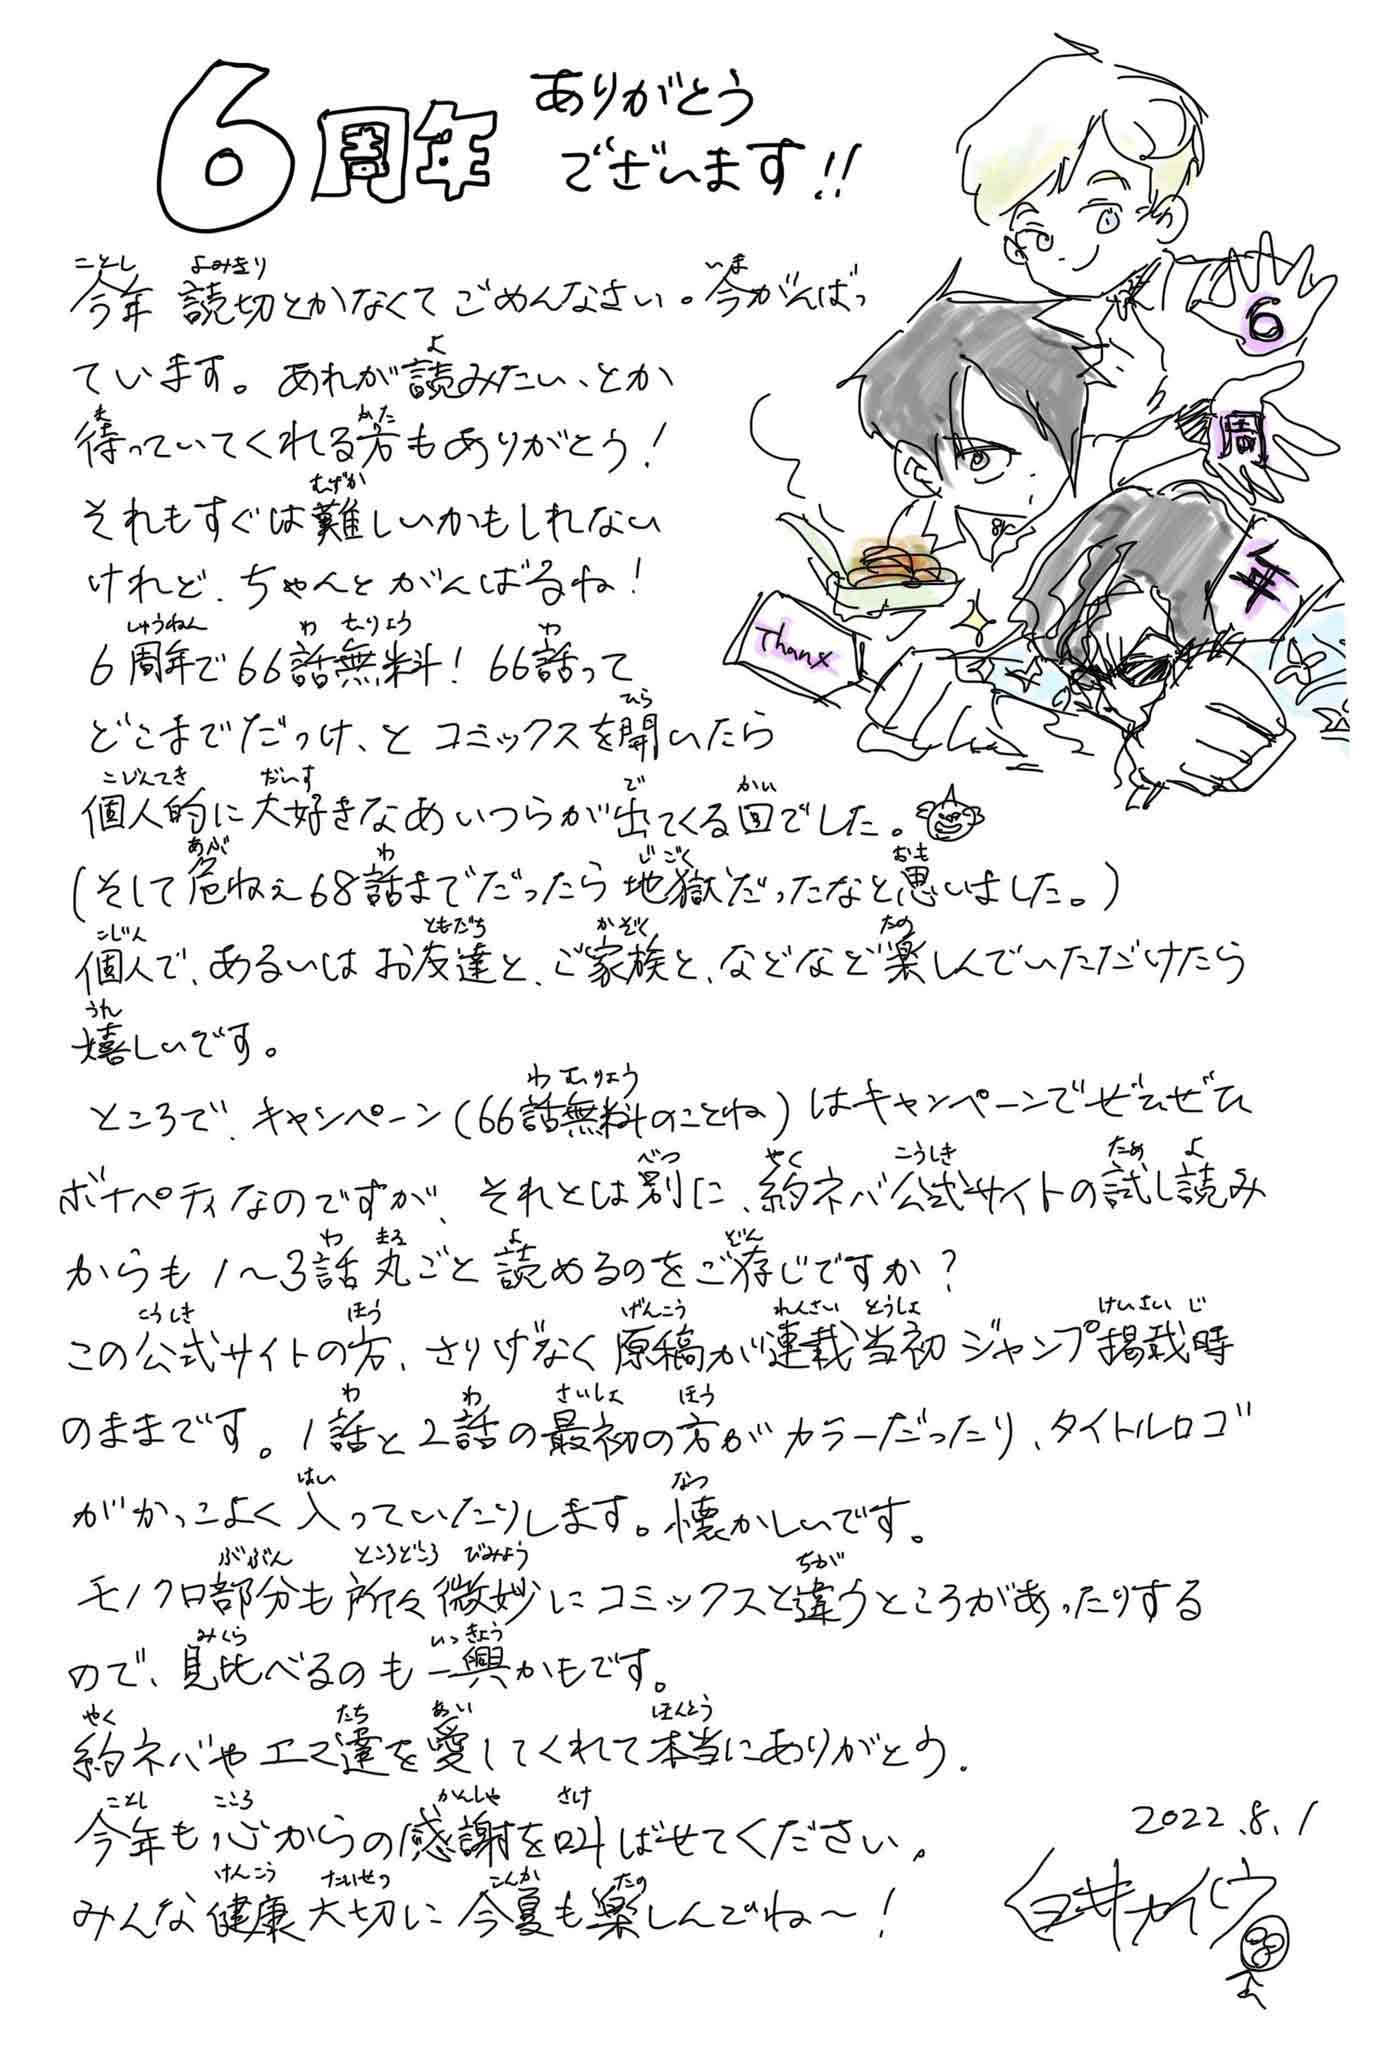 Author's note, the Promised neverland 6th anniversary